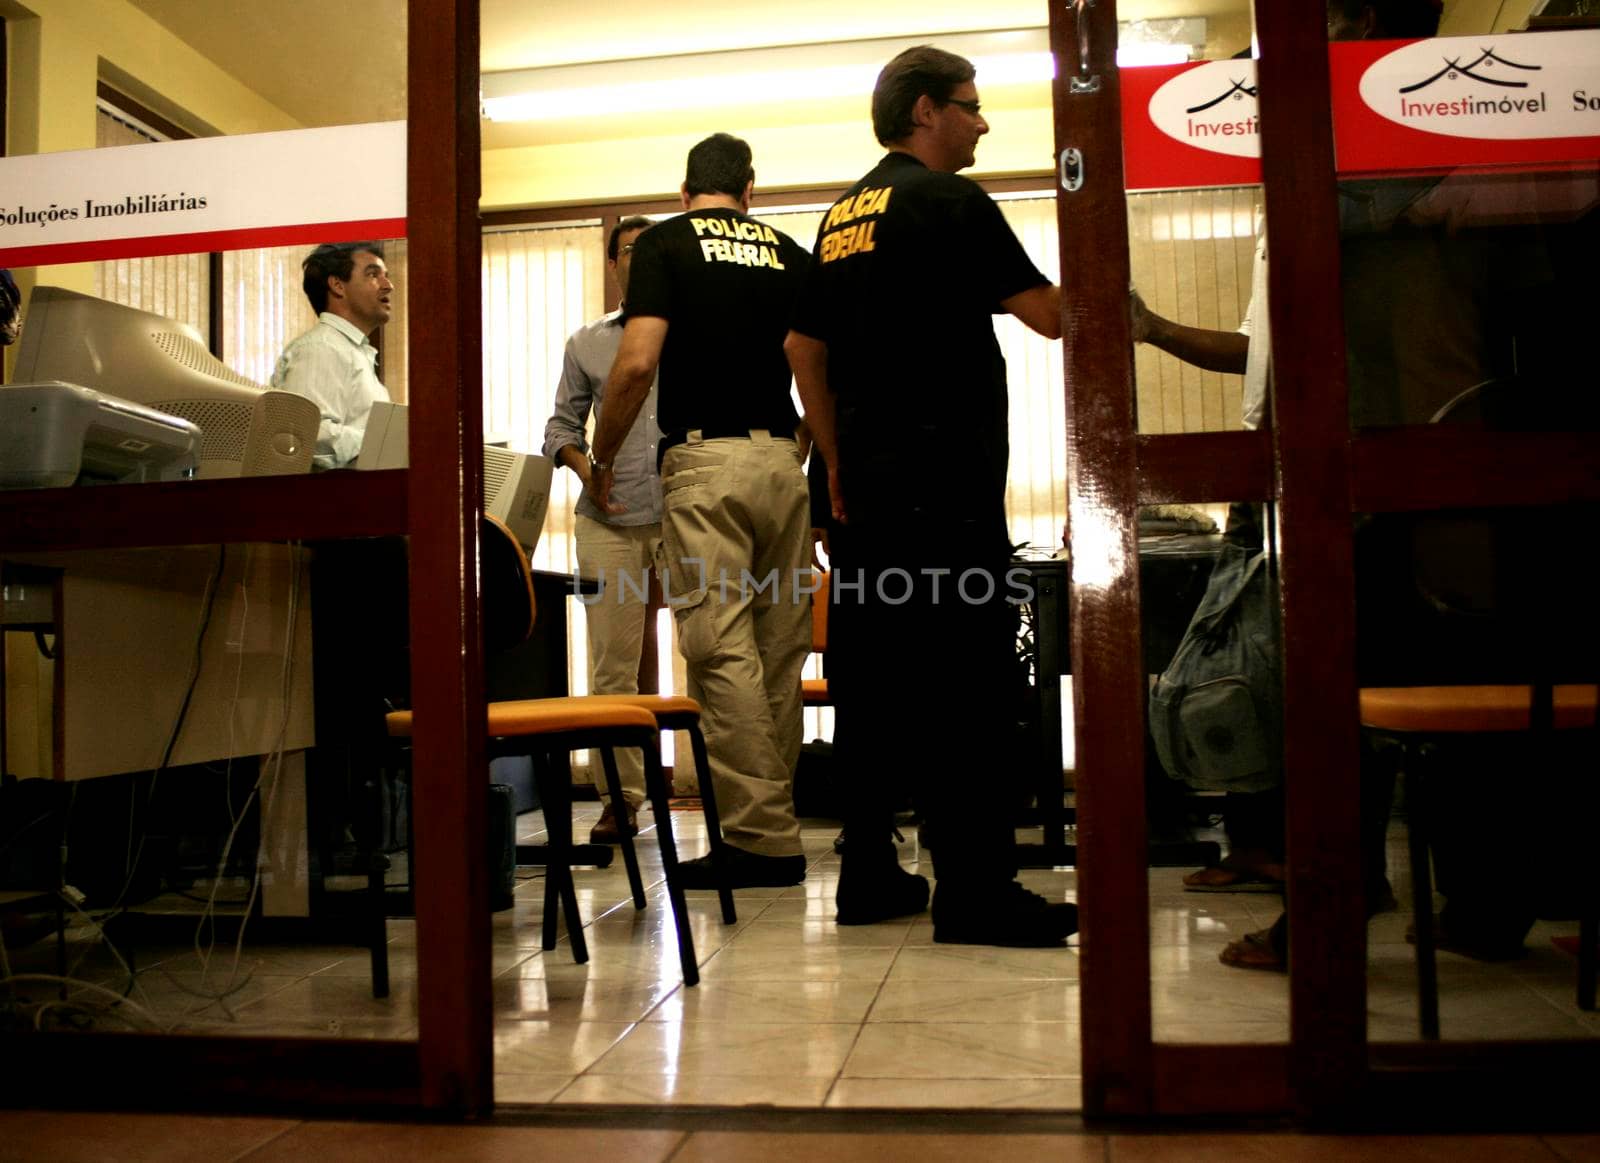 porto seguro, bahia / brazil - august 6, 2009: Federal Police agents are seen during an investigation operation in the city of Porto Seguro, in the south of Bahia.